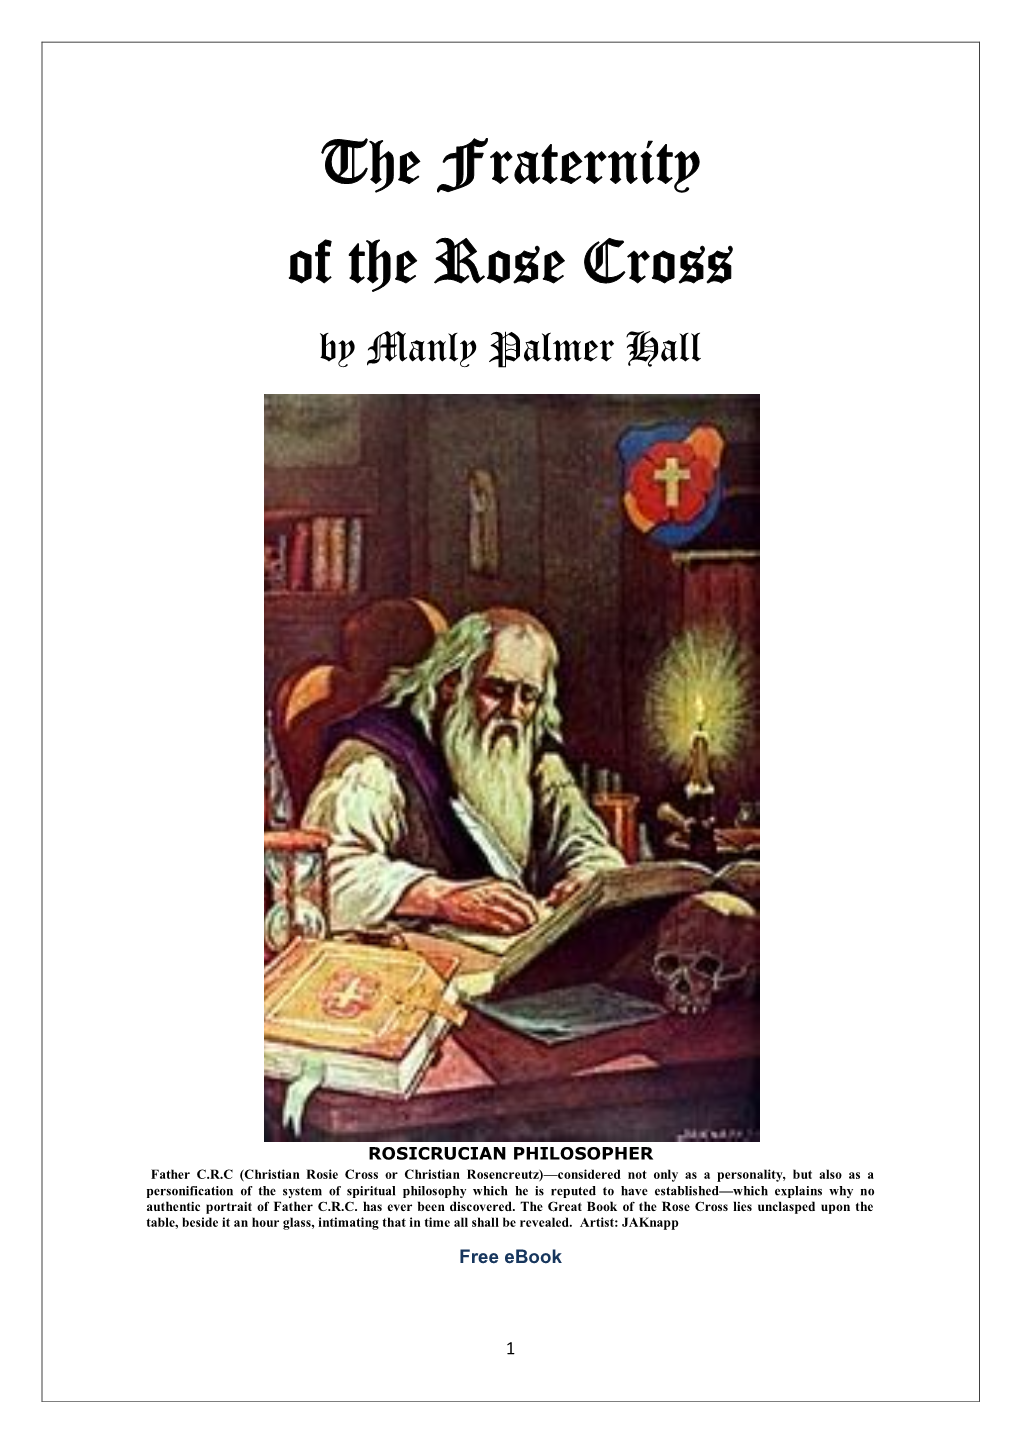 The Fraternity of the Rose Cross by Manly Palmer Hall